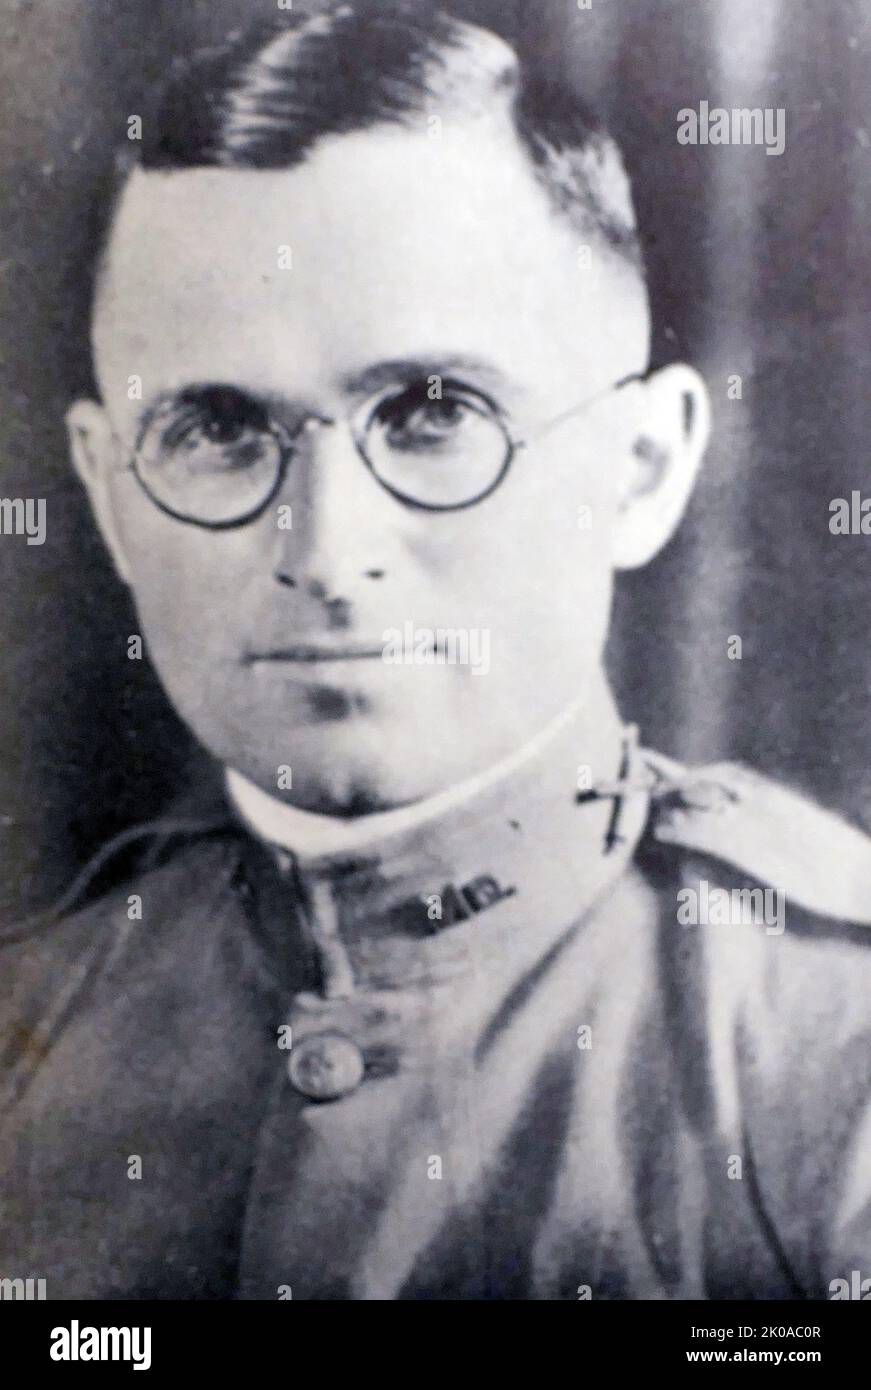 Harry S. Truman (May 8, 1884 - December 26, 1972) was an American politician who was the 33rd president of the United States from 1945 to 1953. Photograph of Truman as a young officer in World War I Stock Photo